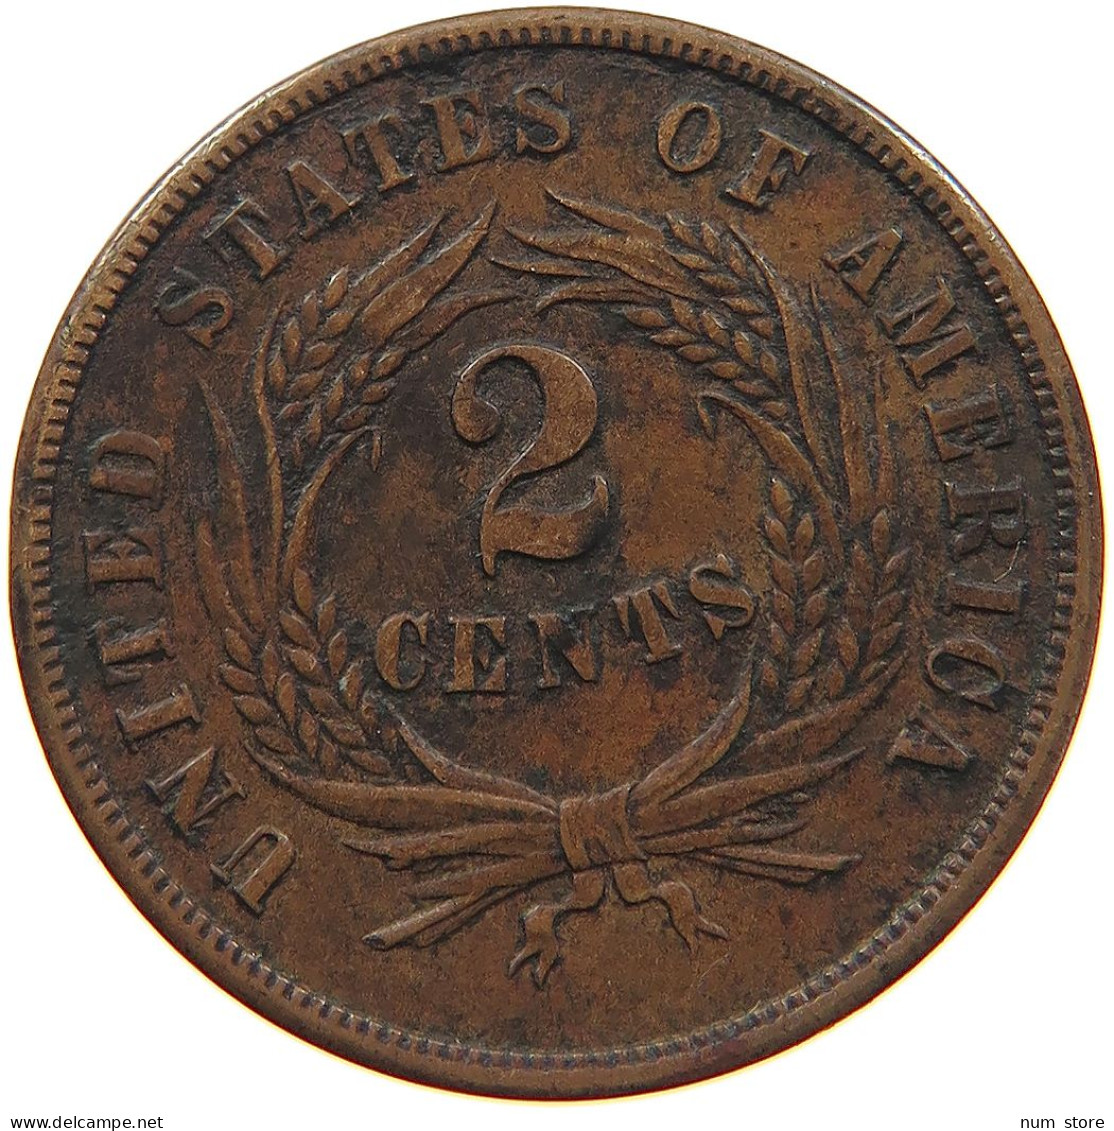 UNITED STATES OF AMERICA TWO CENTS 1864  #t143 0421 - 2, 3 & 20 Cents